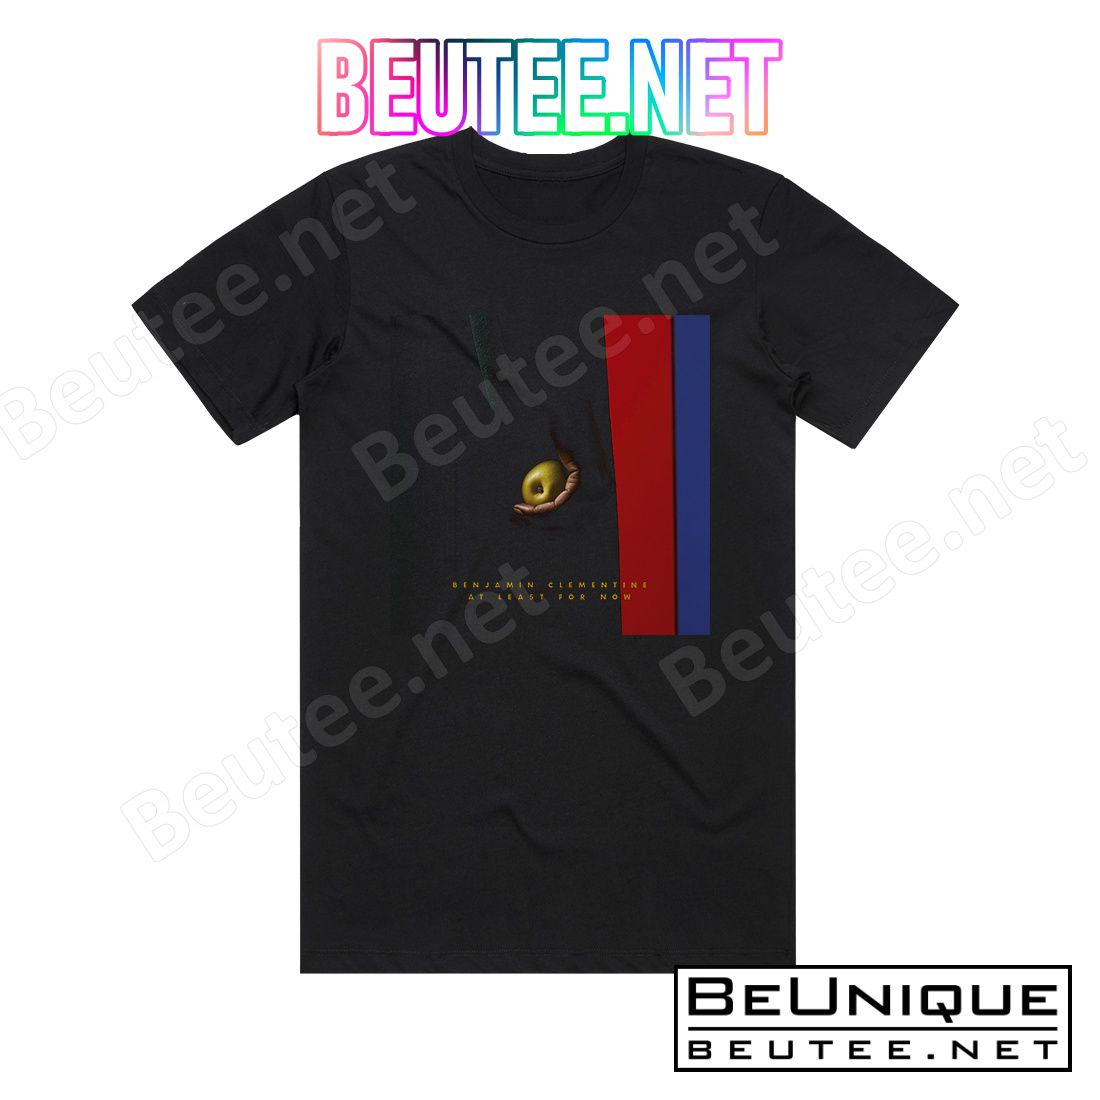 Benjamin Clementine At Least For Now Album Cover T-Shirt